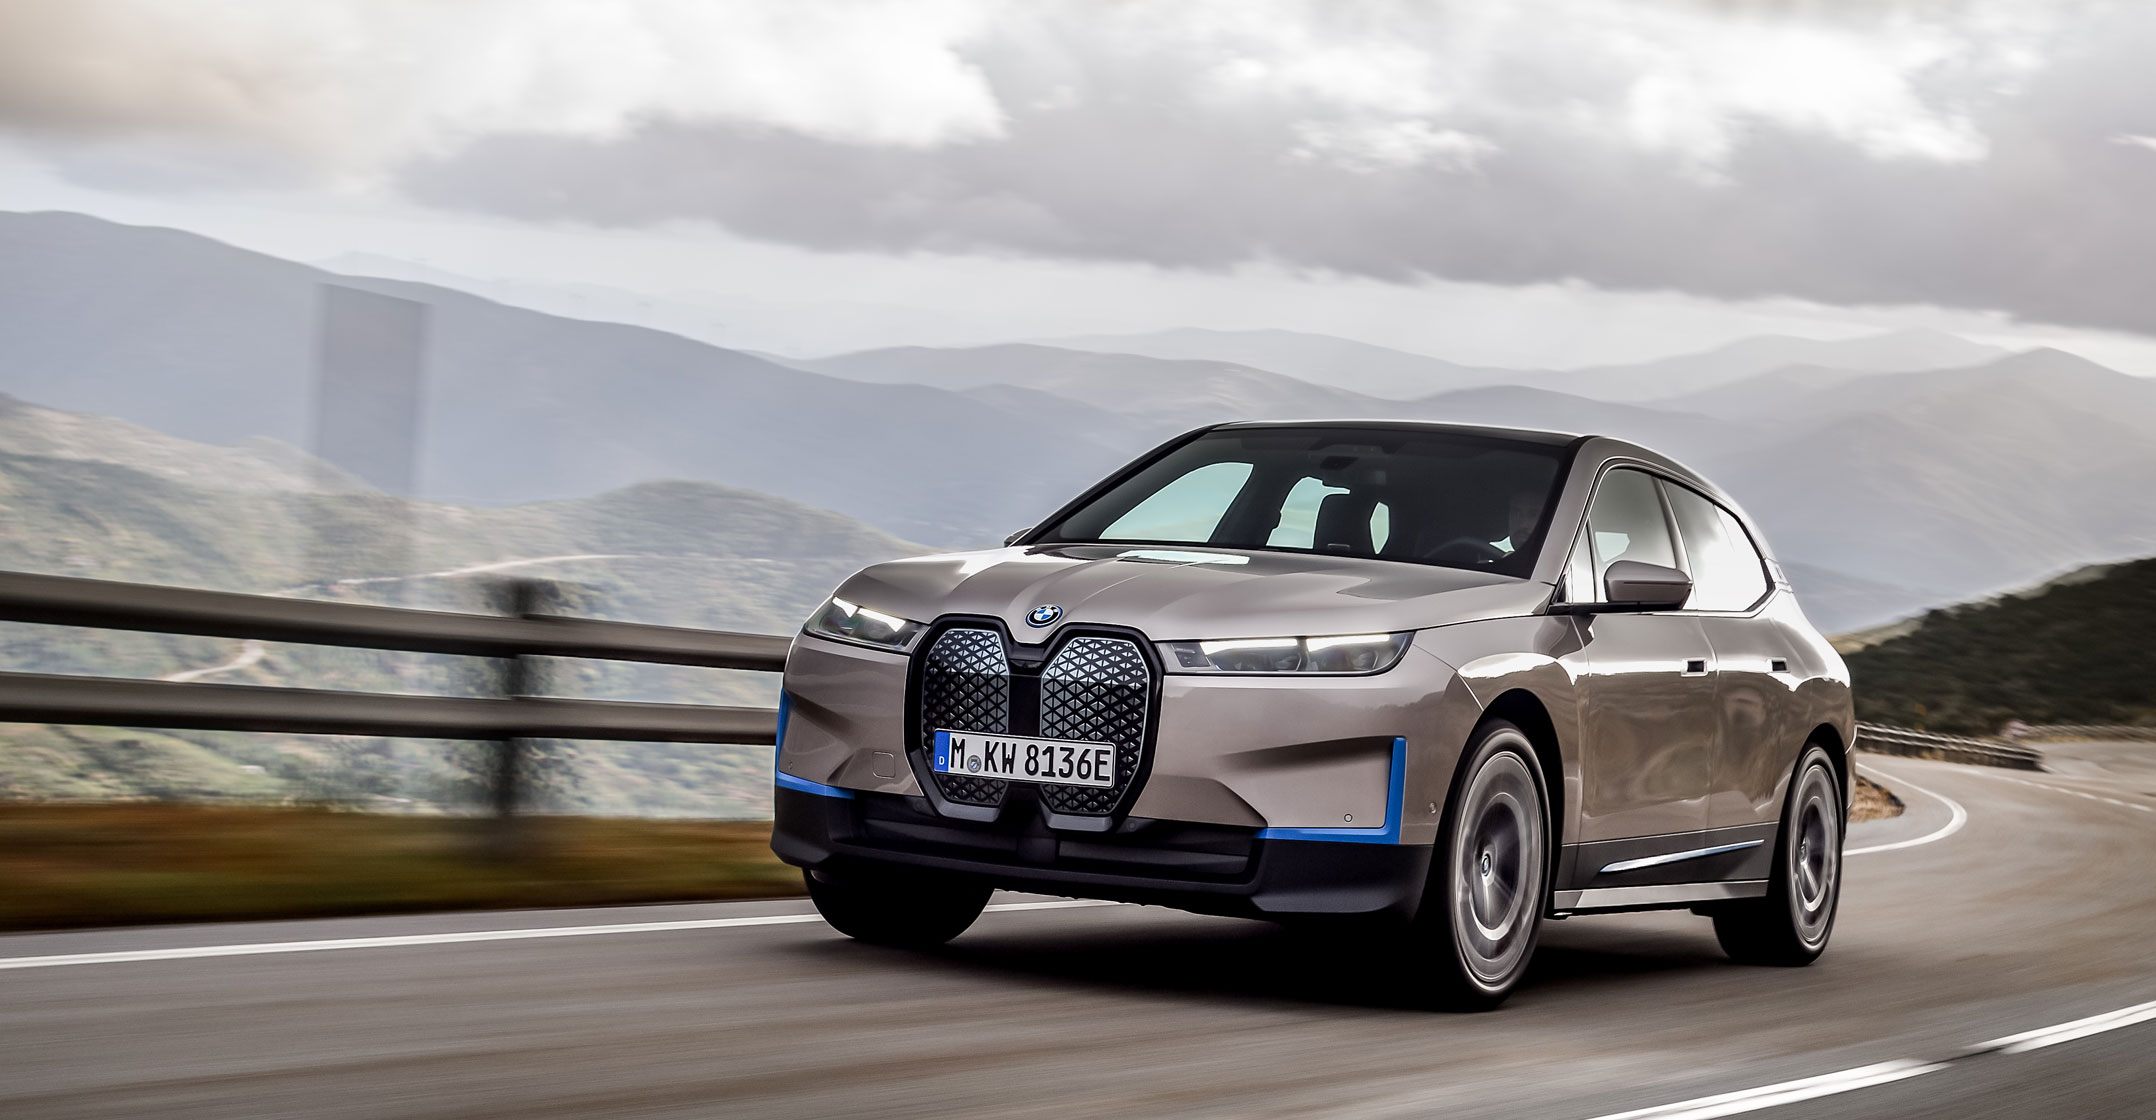 BMW unveils electric SUV to challenge Tesla pictures TechCentral